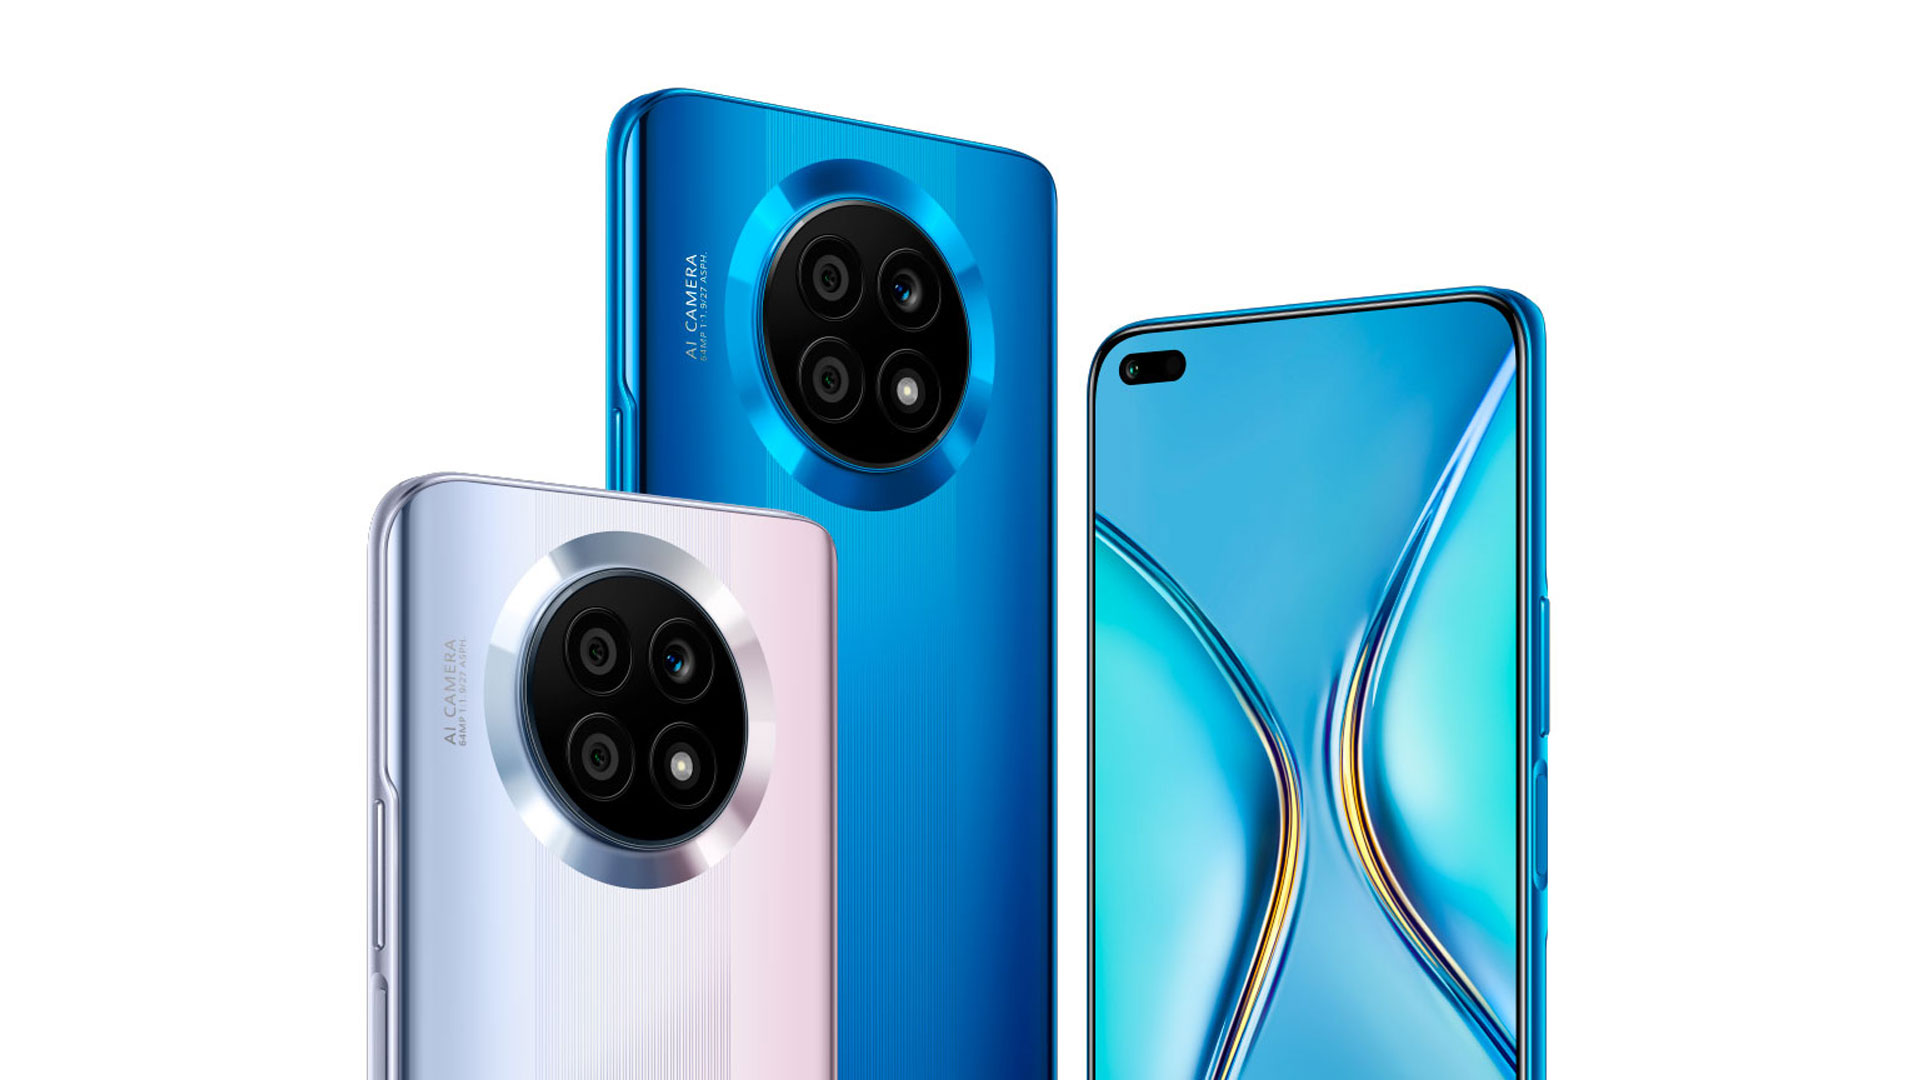 Insider: Honor X20 Max with 7.2-inch screen and 6000mAh battery will debut this month